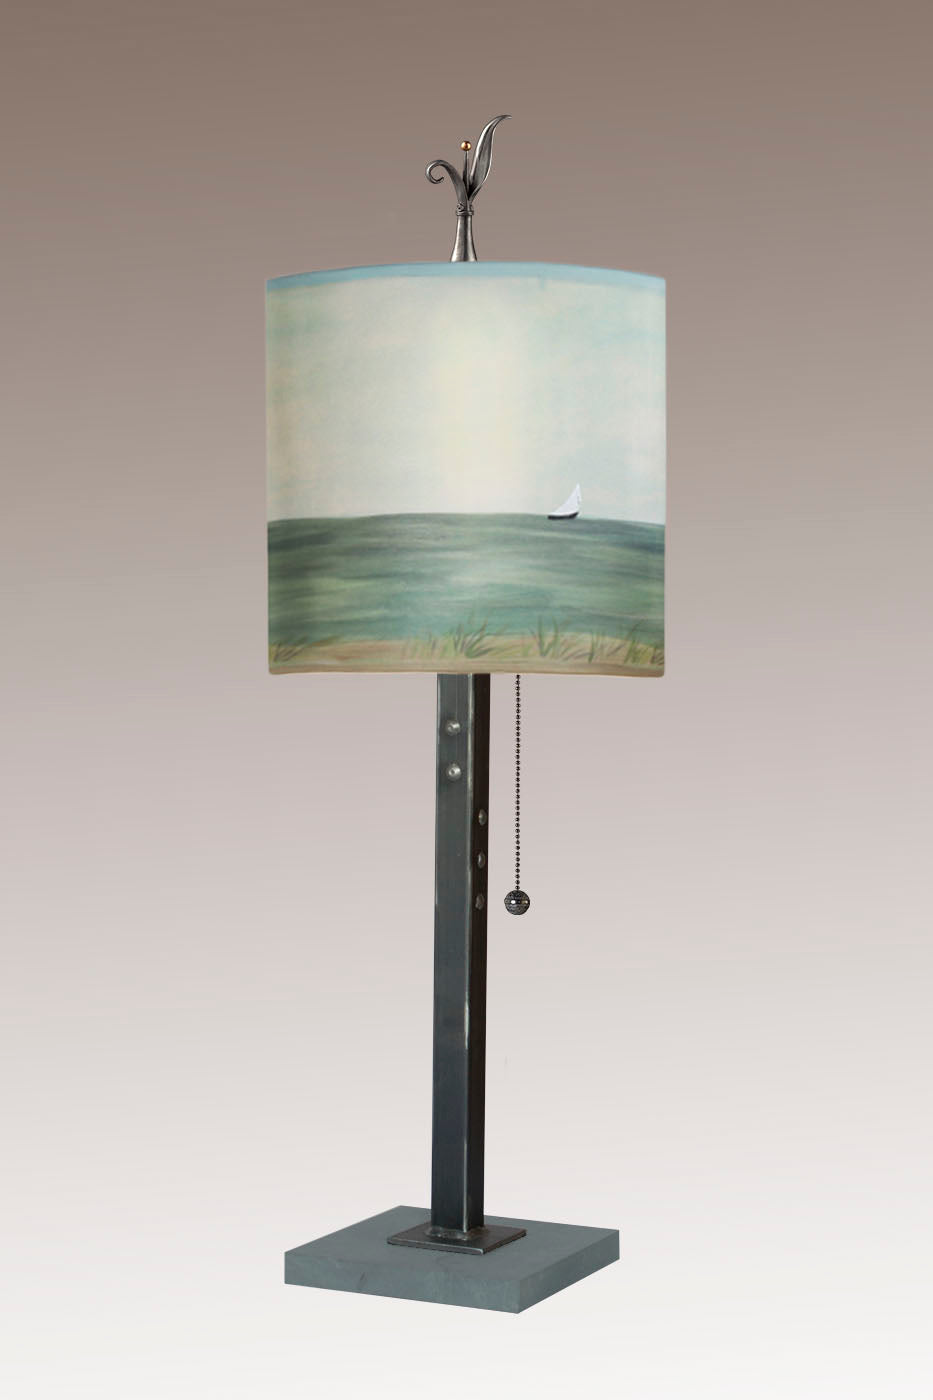 Janna Ugone & Co Table Lamps Steel Table Lamp with Medium Drum Shade in Shore